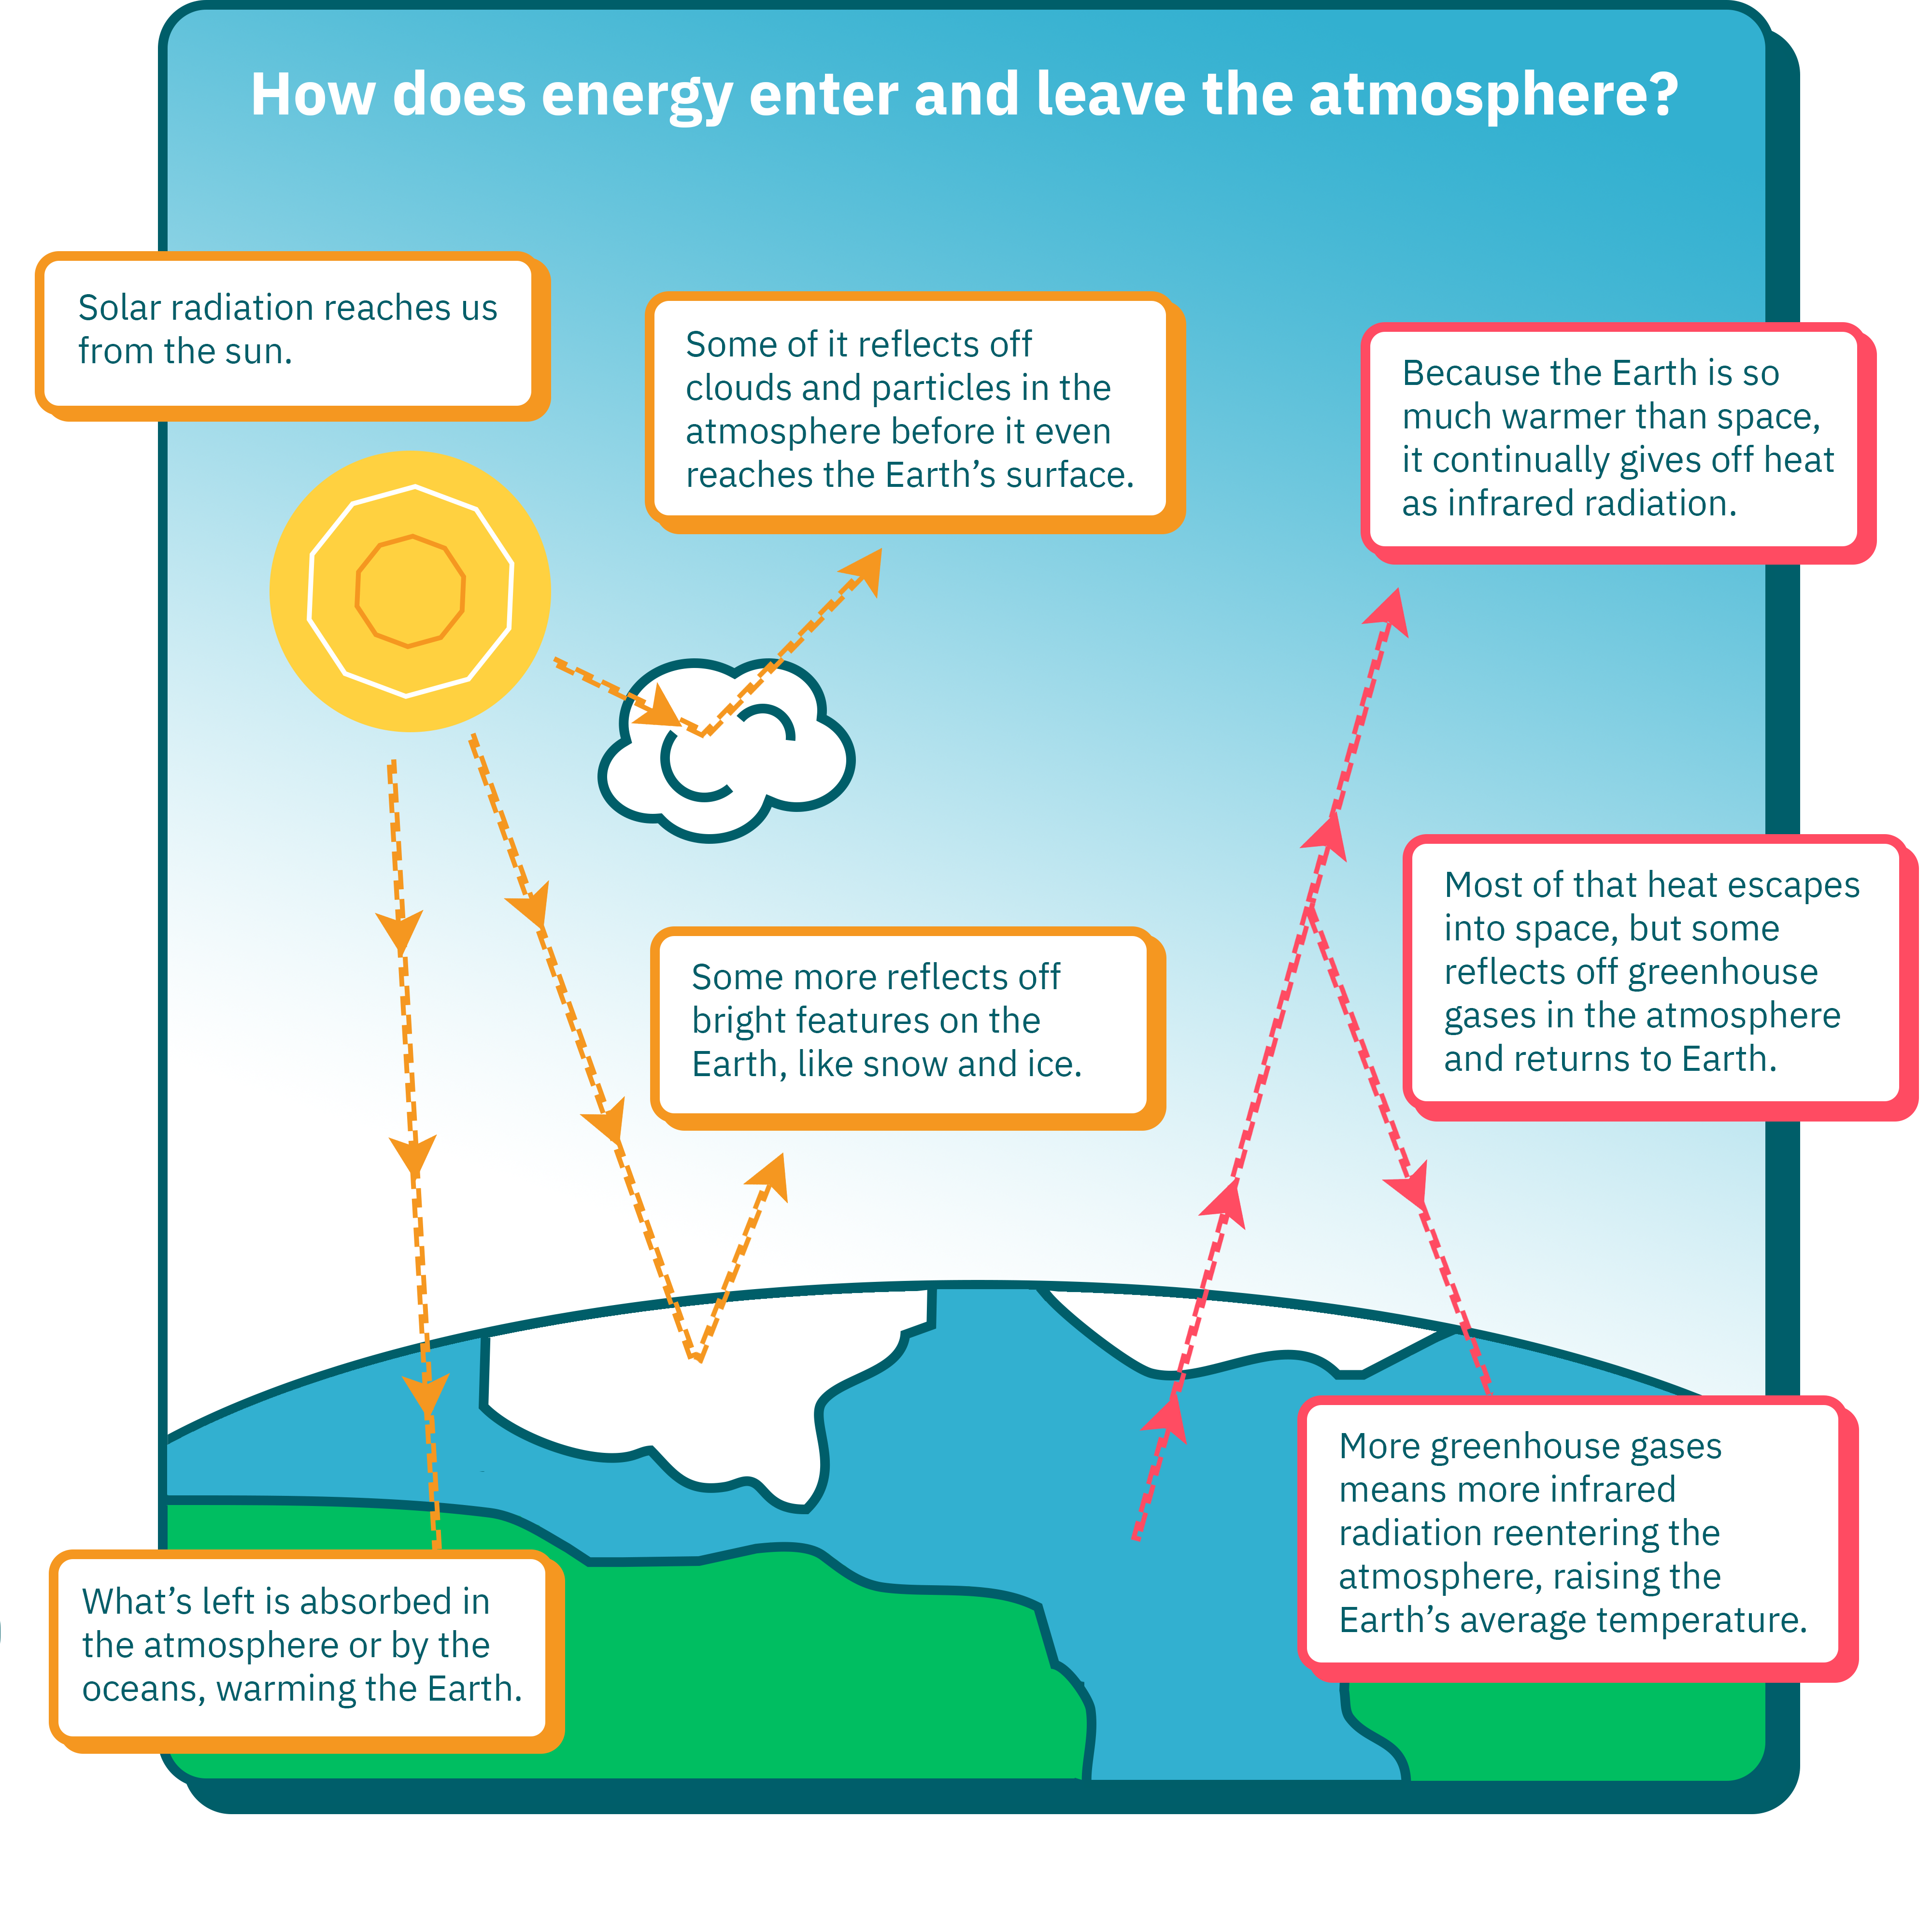 Infographic: How does energy enter the atmosphere? 1) Solar radiation reaches us from the sun. 2) Some of it reflects off clouds and particles in the atmosphere before it even reaches the Earth’s surface. 3) Some more reflects off bright features on the Earth, like snow and ice. 4) What’s left is absorbed in the atmosphere or by the oceans, warming the Earth. How does energy leave the atmosphere? 1) Because the Earth is so much warmer than space, it continually gives off heat as infrared radiation. 2) Most of that heat escapes into space, but some reflects off greenhouse gases in the atmosphere and returns to Earth. 3) More greenhouse gases means more infrared radiation reentering the atmosphere, raising the Earth’s average temperature.